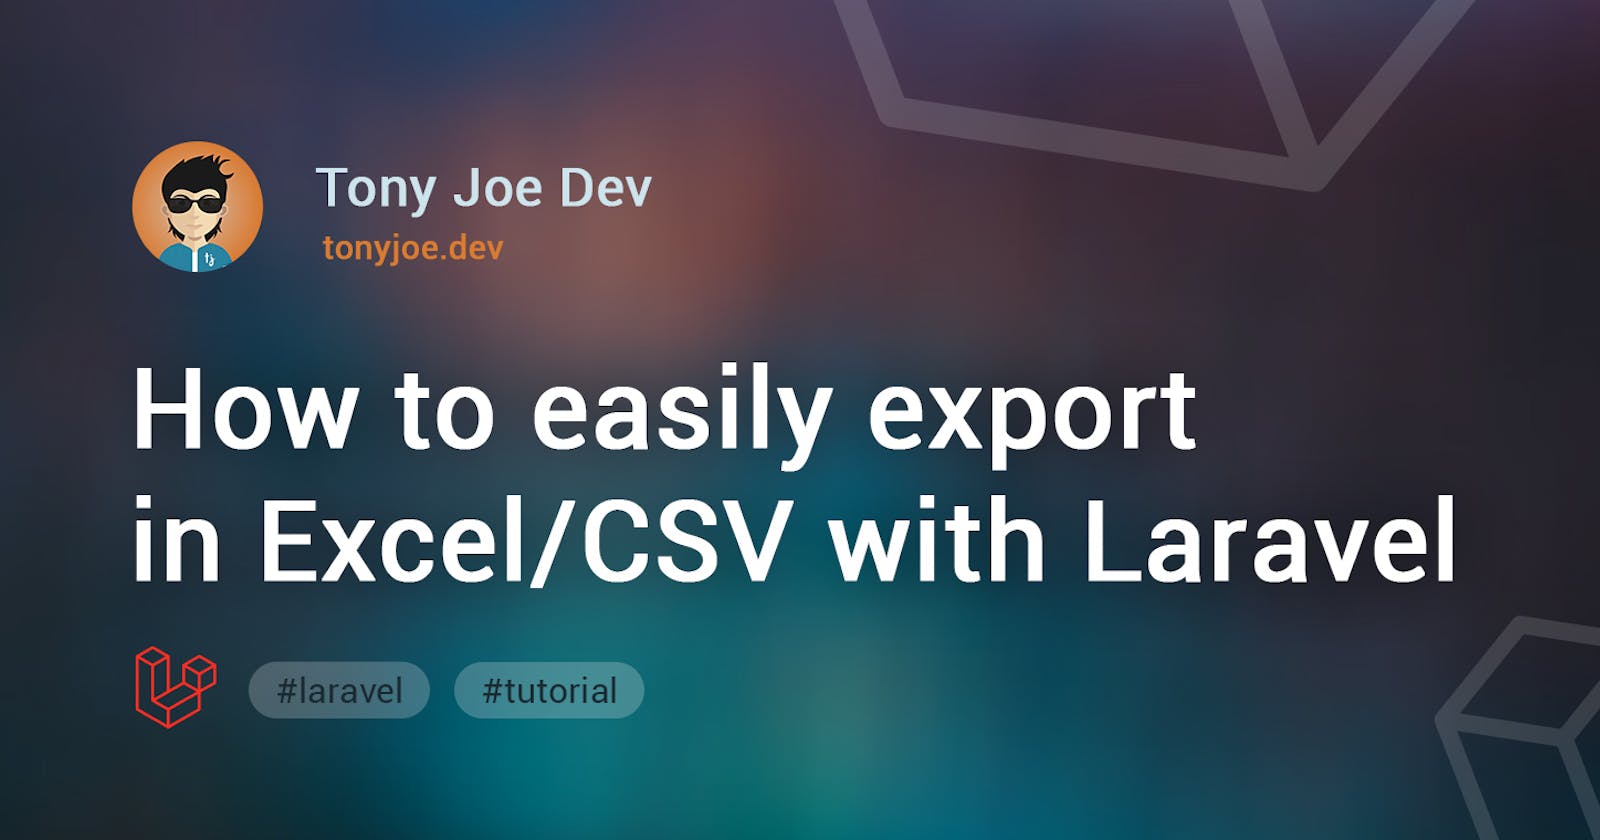 How to easily export in Excel or CSV with Laravel